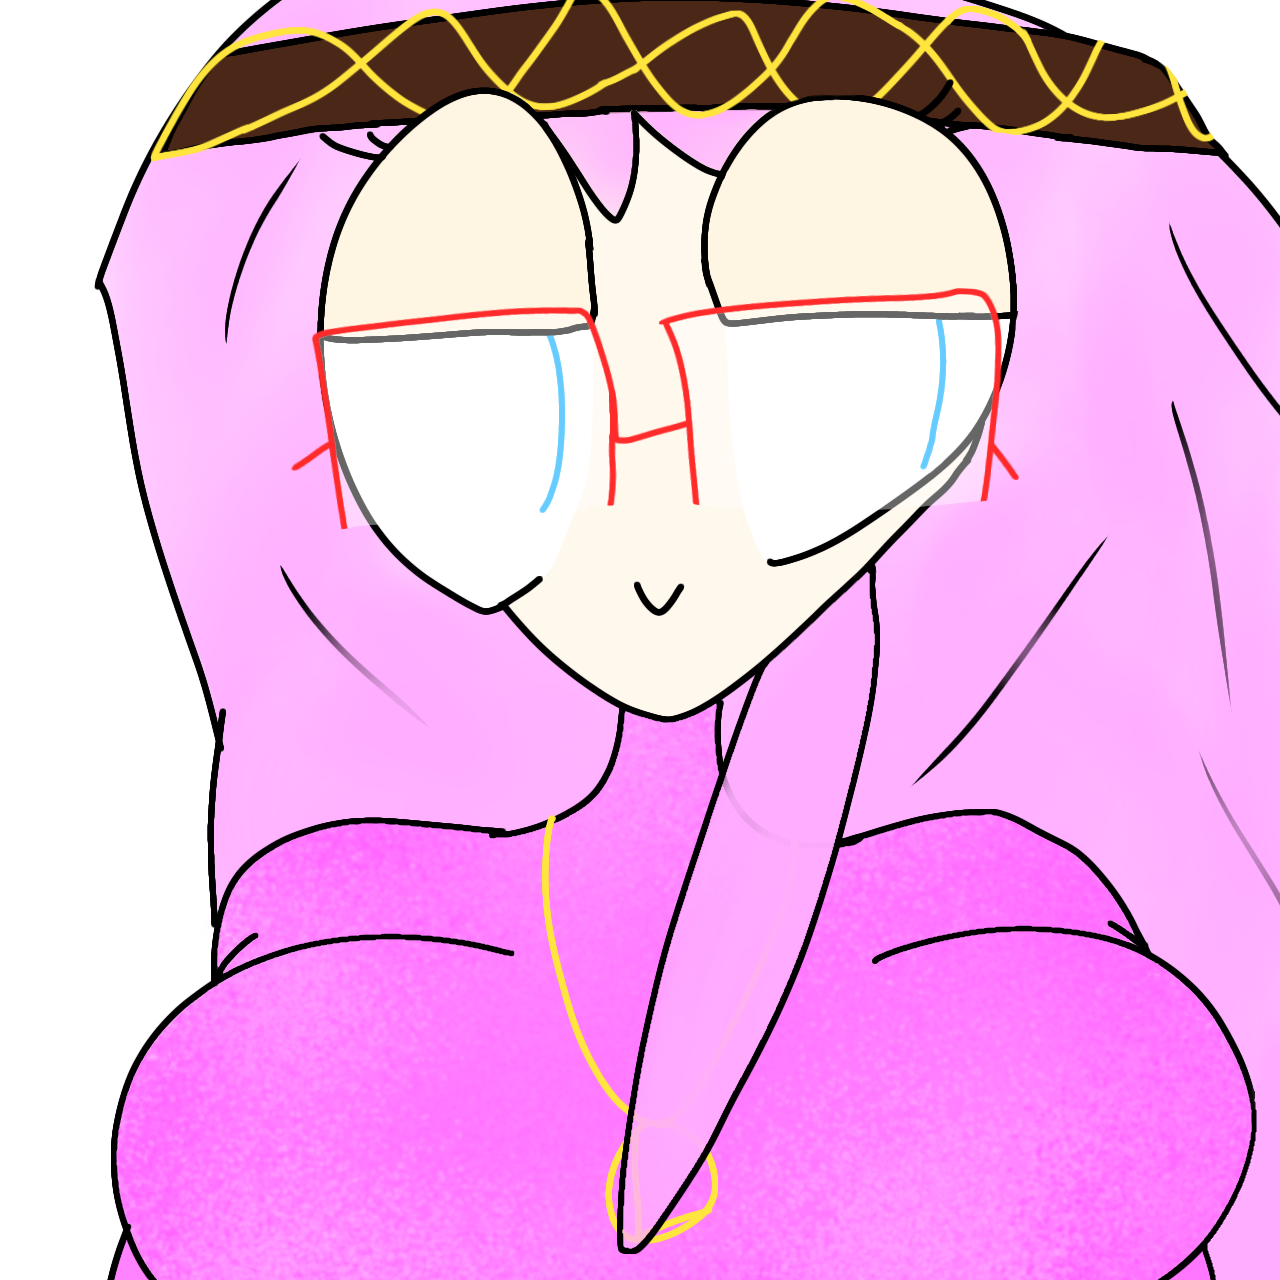 A digital portrait drawing of Luka Megurine with the Light & Casual module, looking away and smiling. The module's attire is a pink sweater, a gold necklace with a circle labeled the letter 'L', red glasses, and a hairband resembling the top of her headphones.